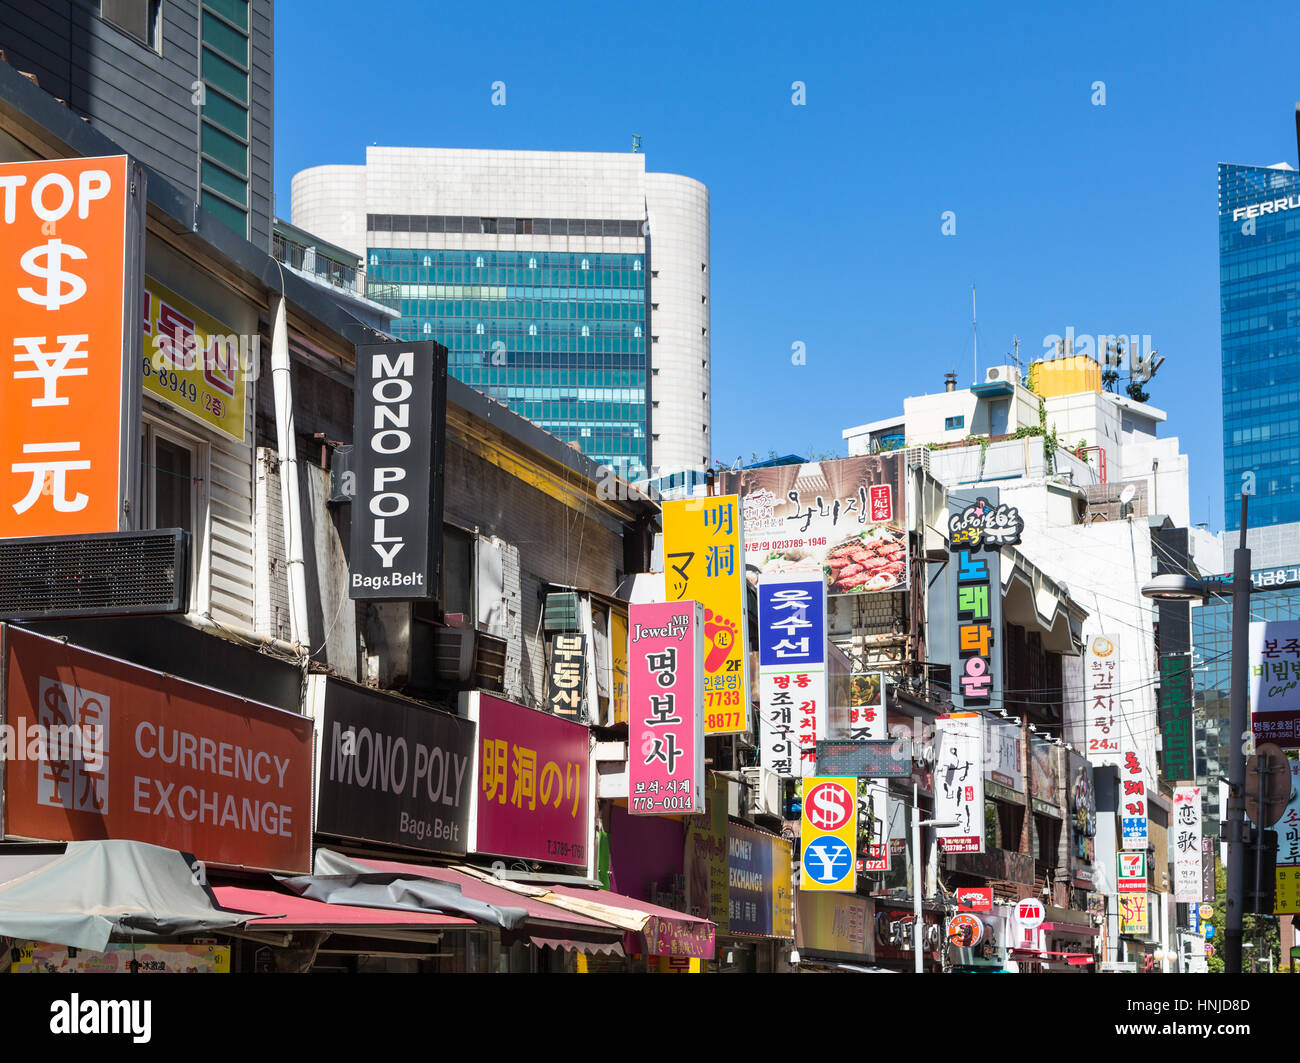 SEOUL - SEPTEMBER 7, 2015: Commercial signs in Korean language in front of shop in a street in Seoul, South Korea capital city. Stock Photo